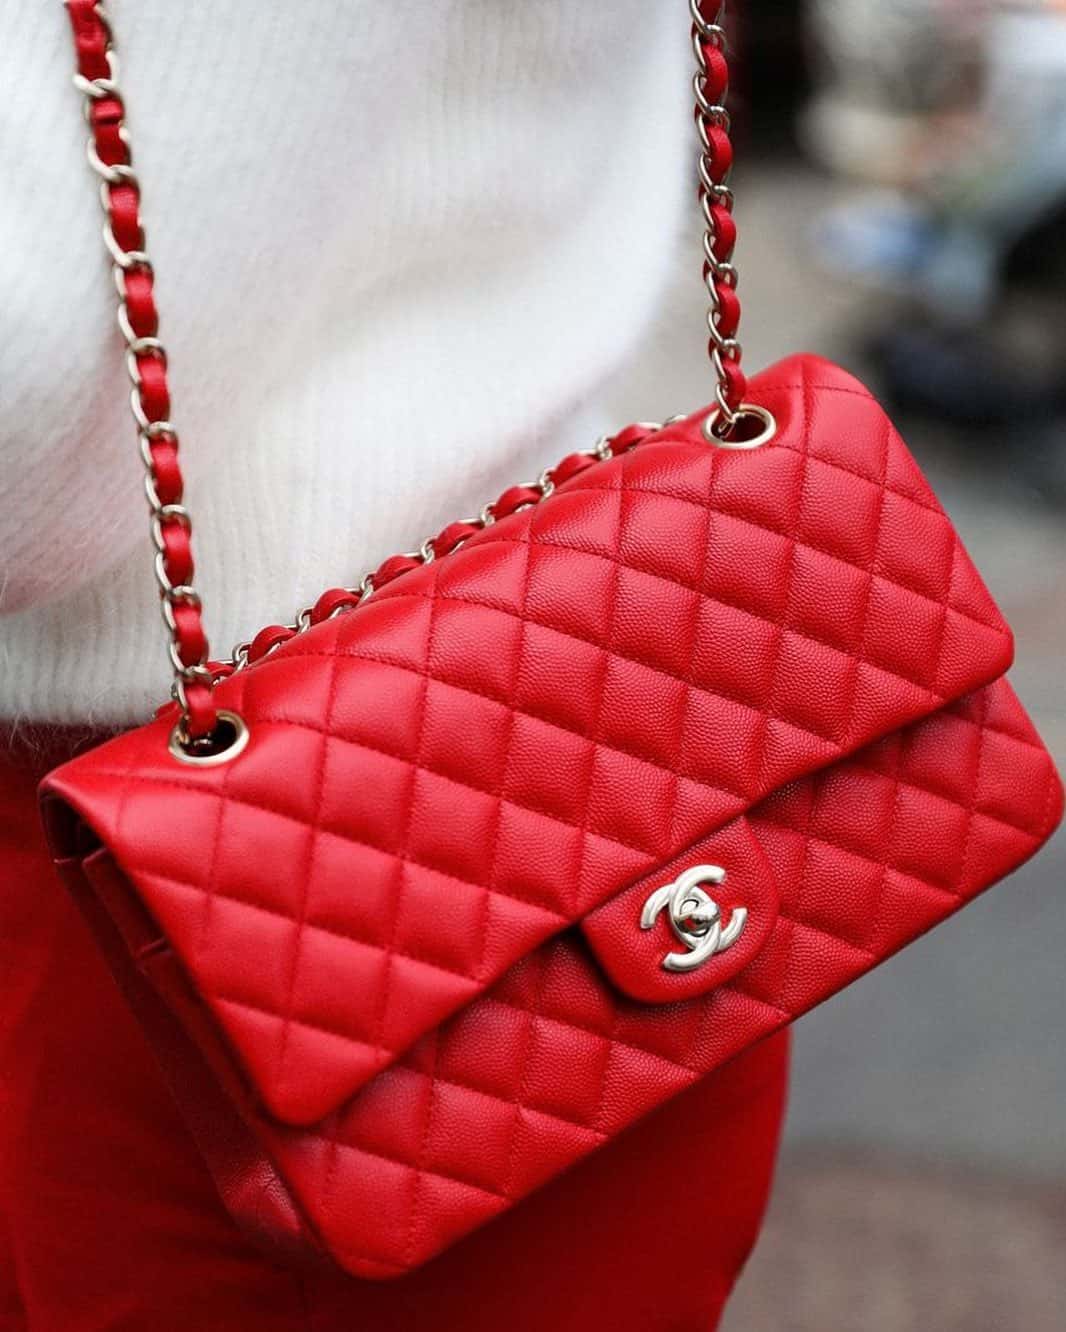 Børnehave fysiker jeg behøver Why are Chanel Bags Expensive in 2023? • Petite in Paris